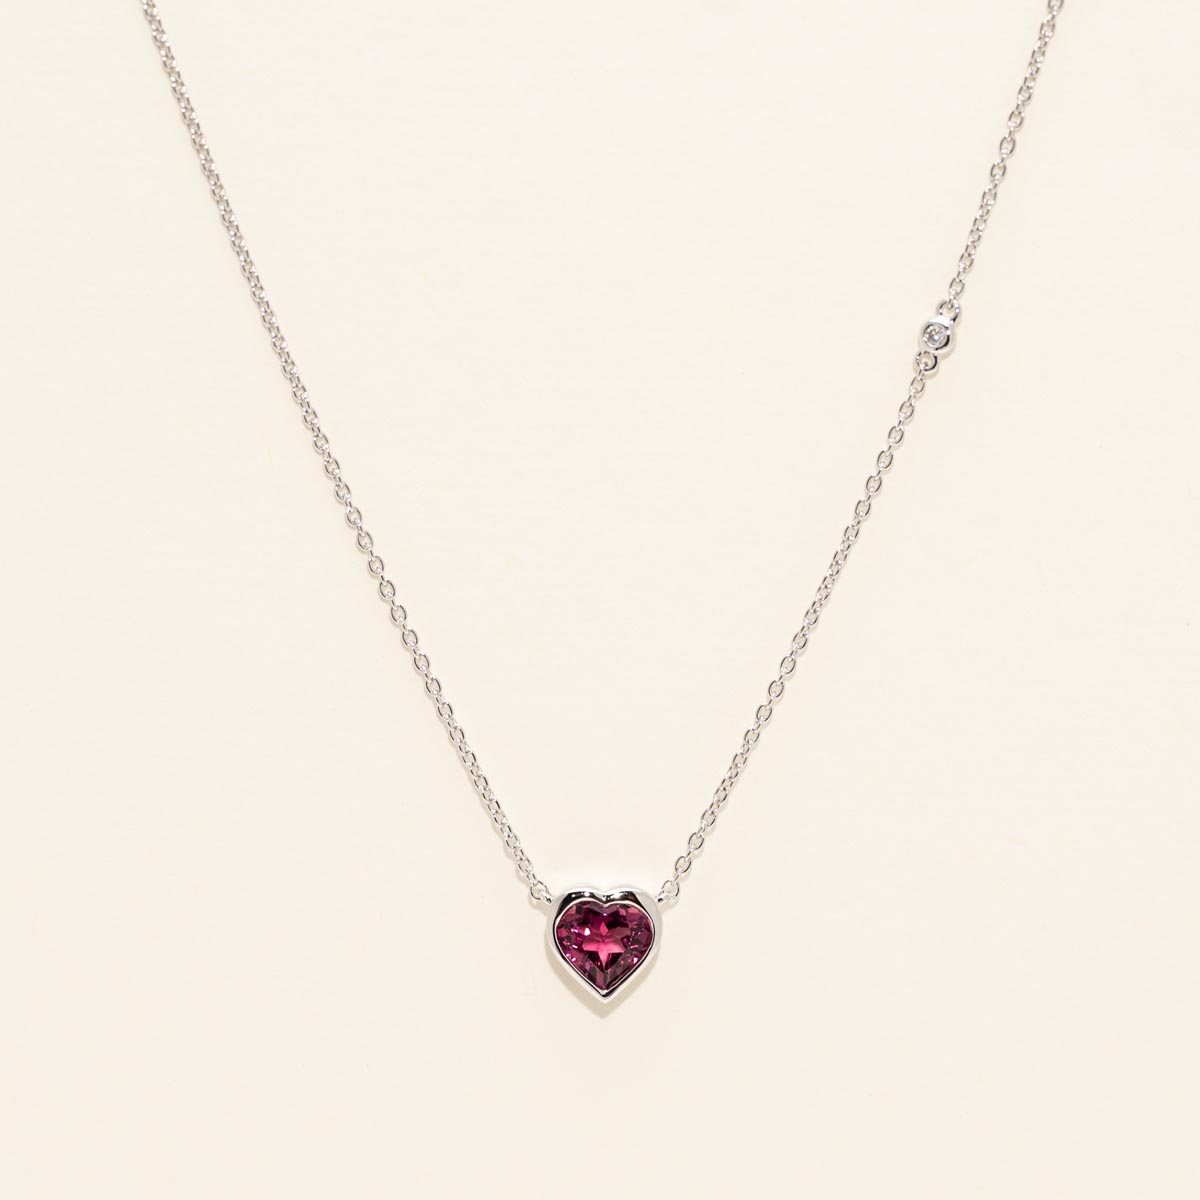 Maine Pink Tourmaline Heart Necklace in 14kt White Gold